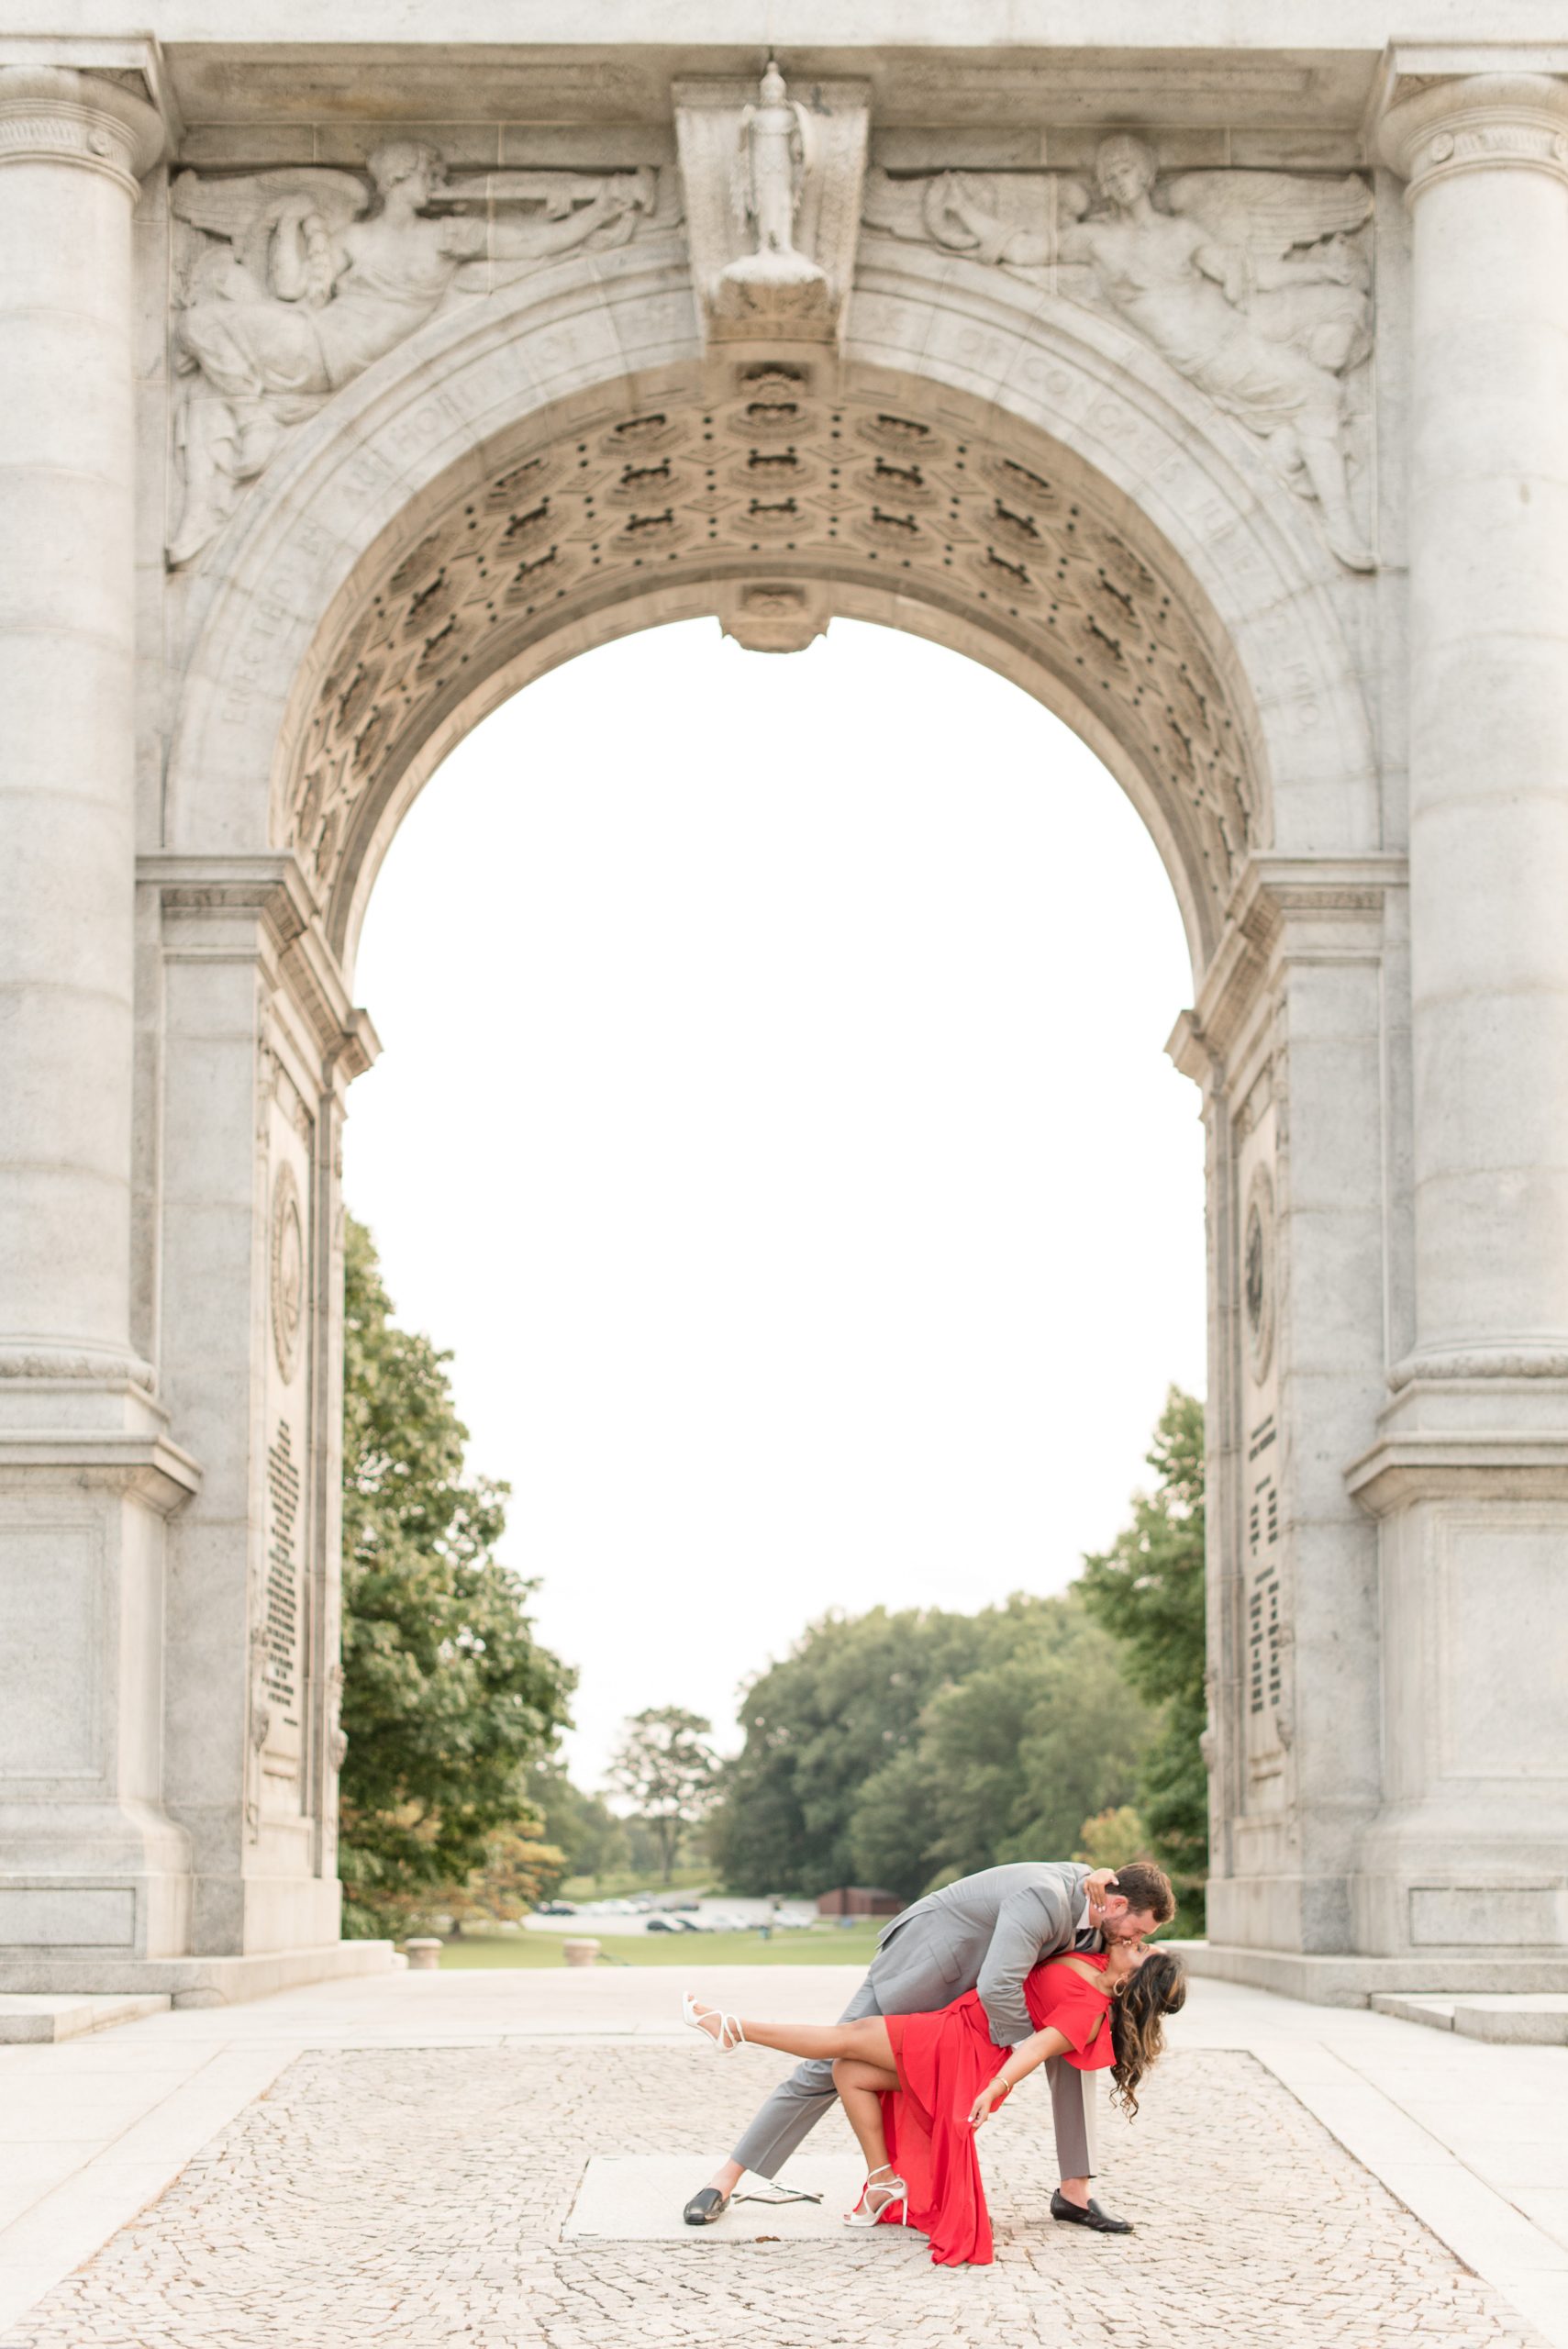 Summer engagement session at the National Arch